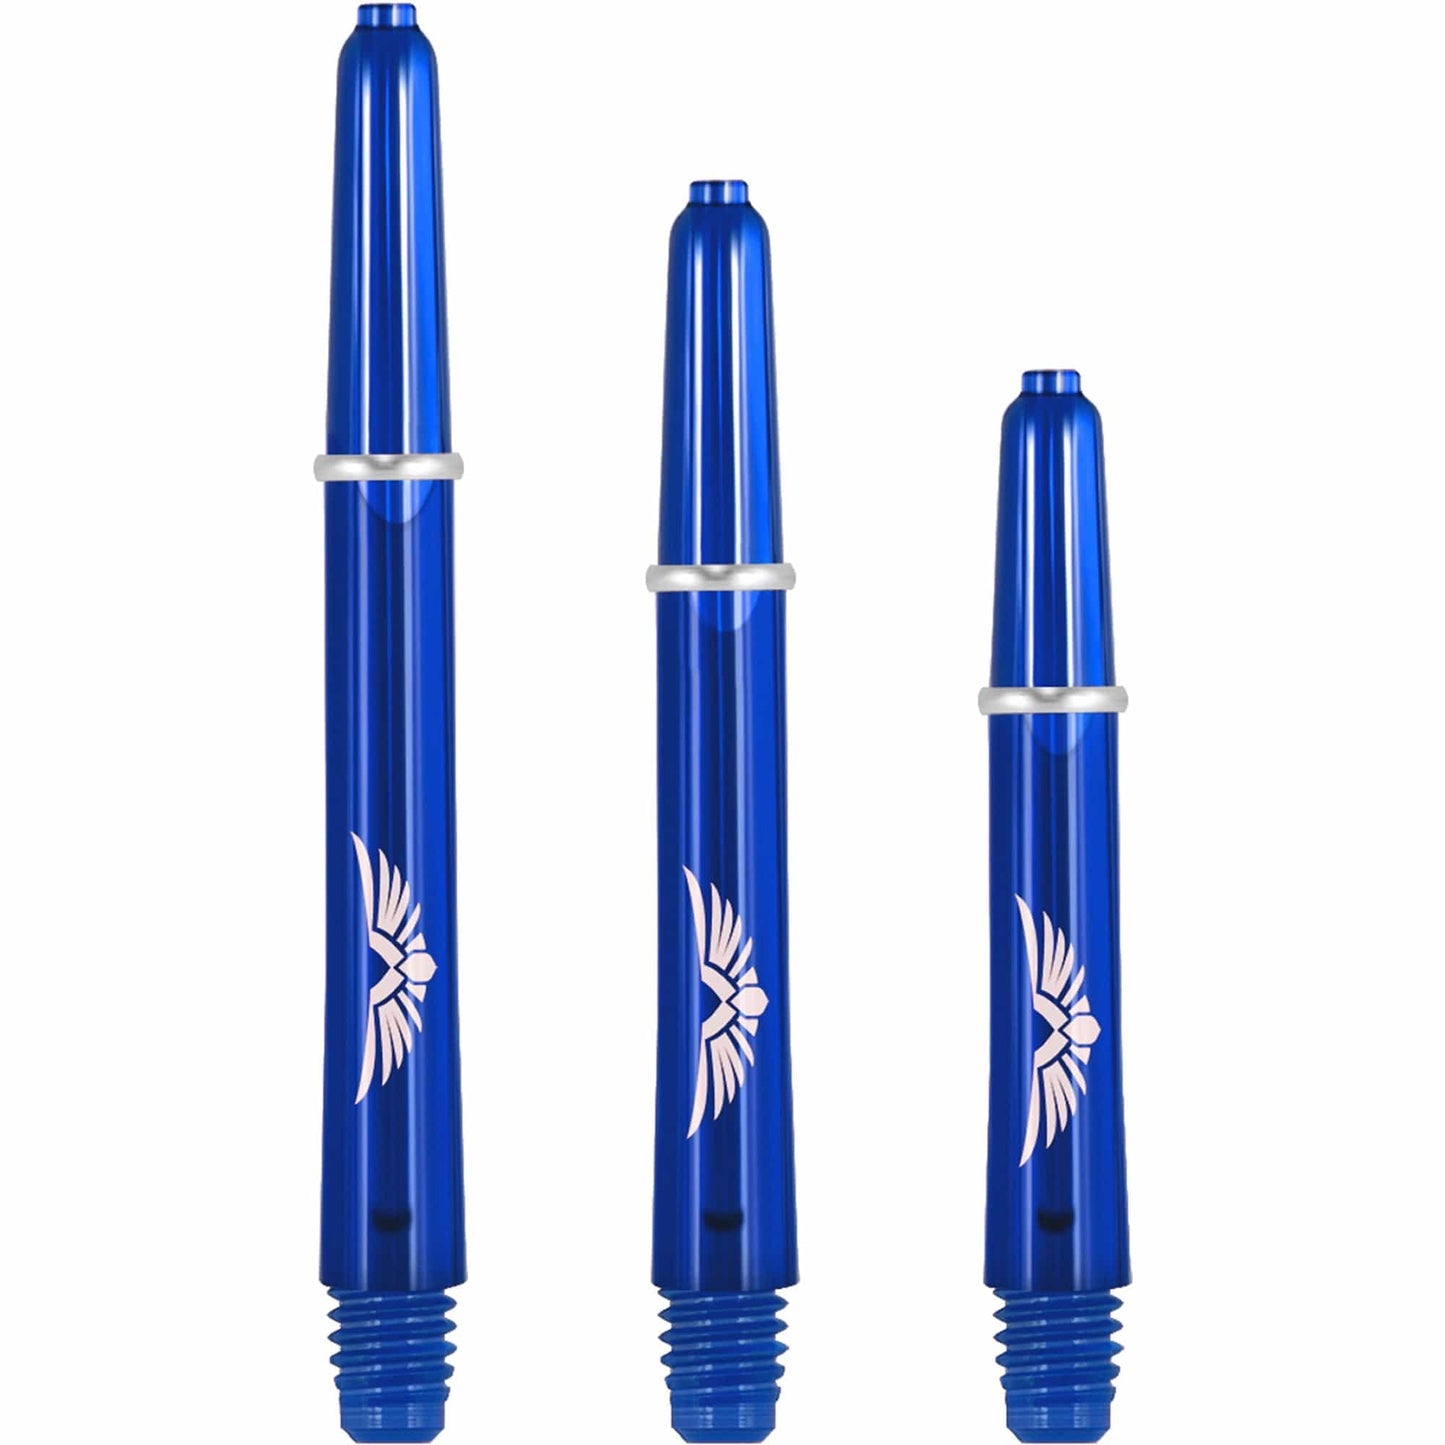 Shot Eagle Claw Dart Shafts - with Machined Rings - Strong Polycarbonate Stems - Blue